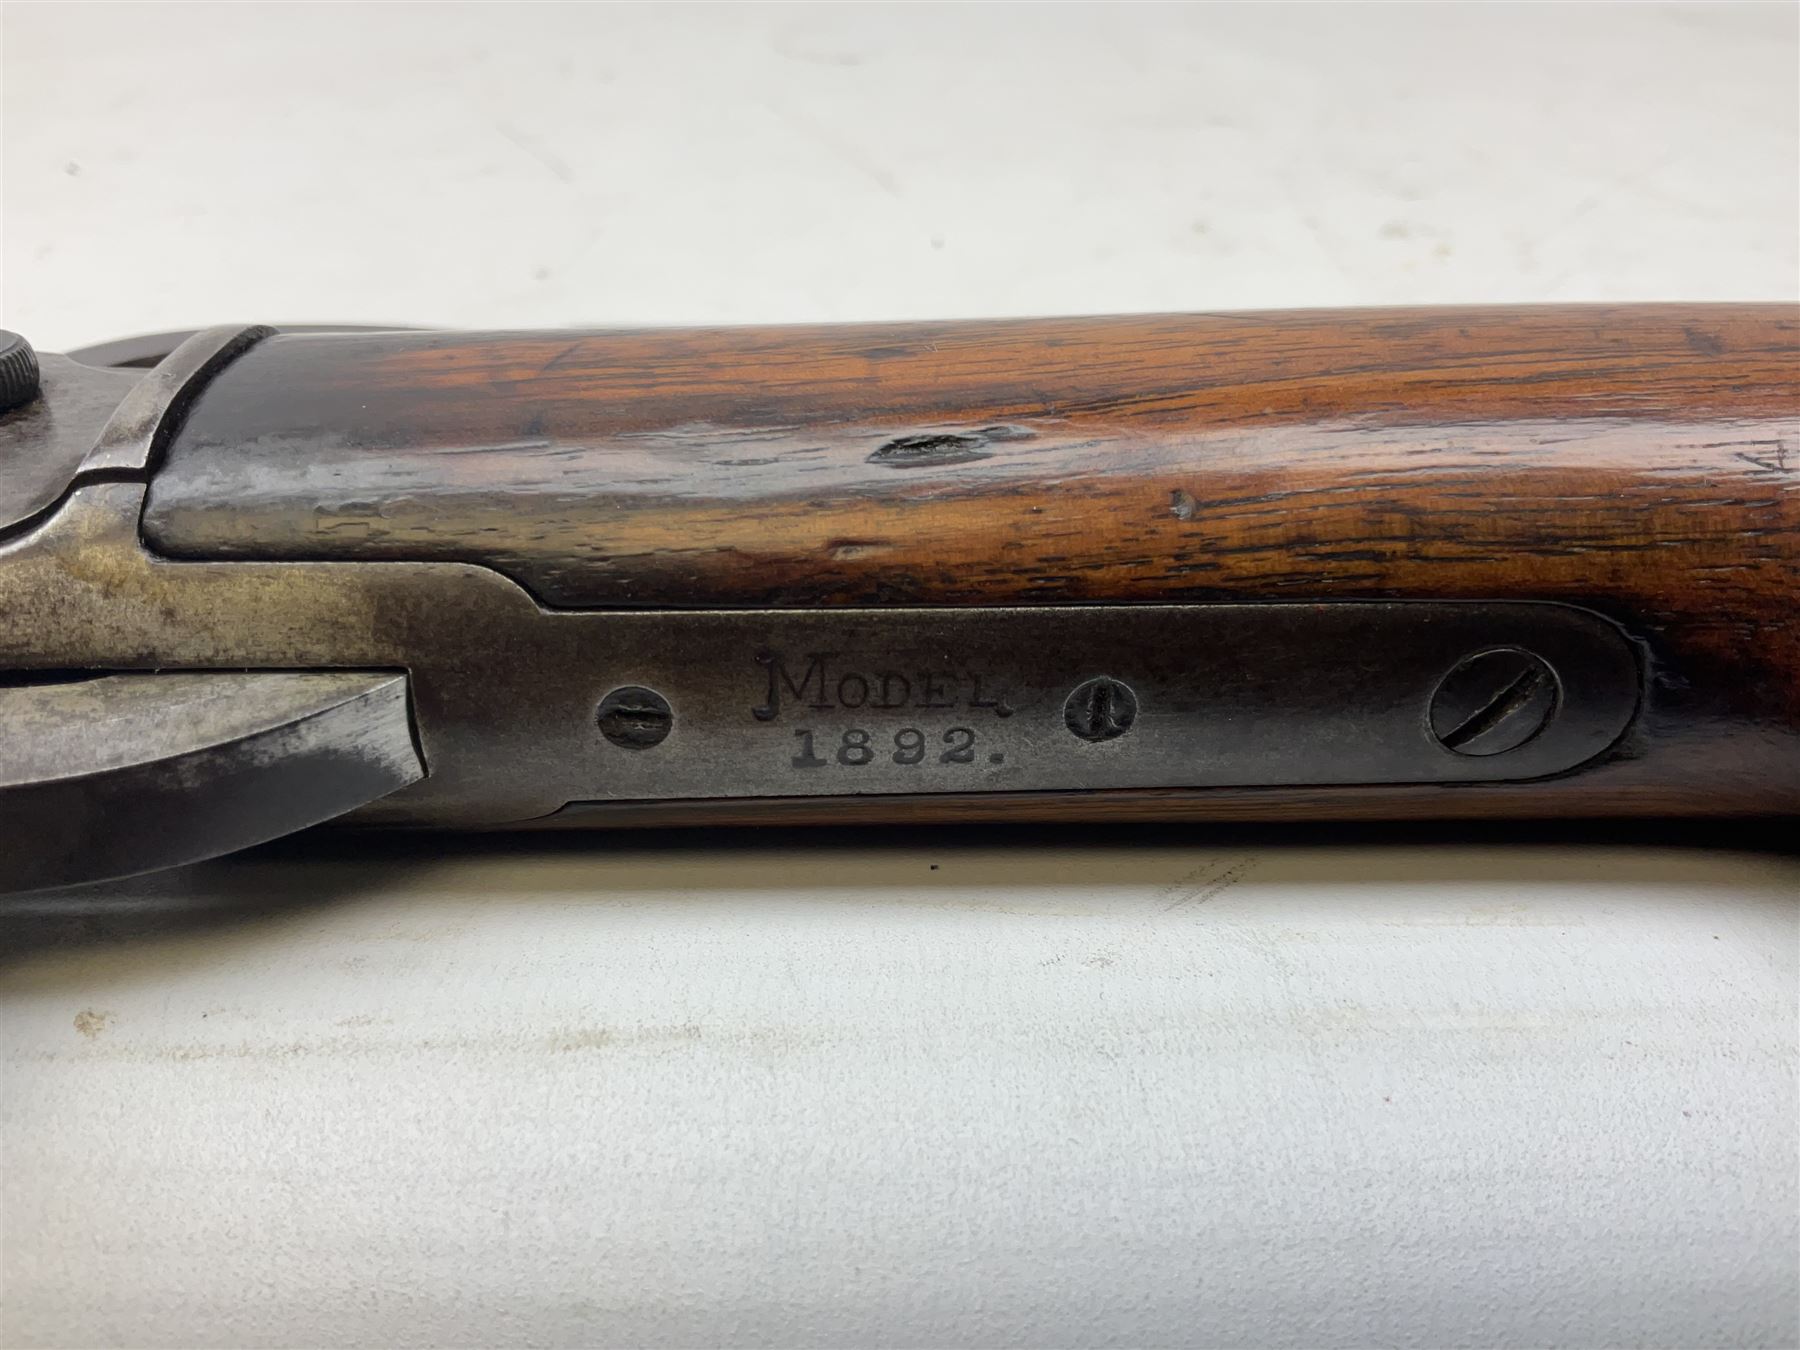 Marlin Firearms Co. USA 'Safety' .32 rim-fire rifle dated 1892 - Image 11 of 15